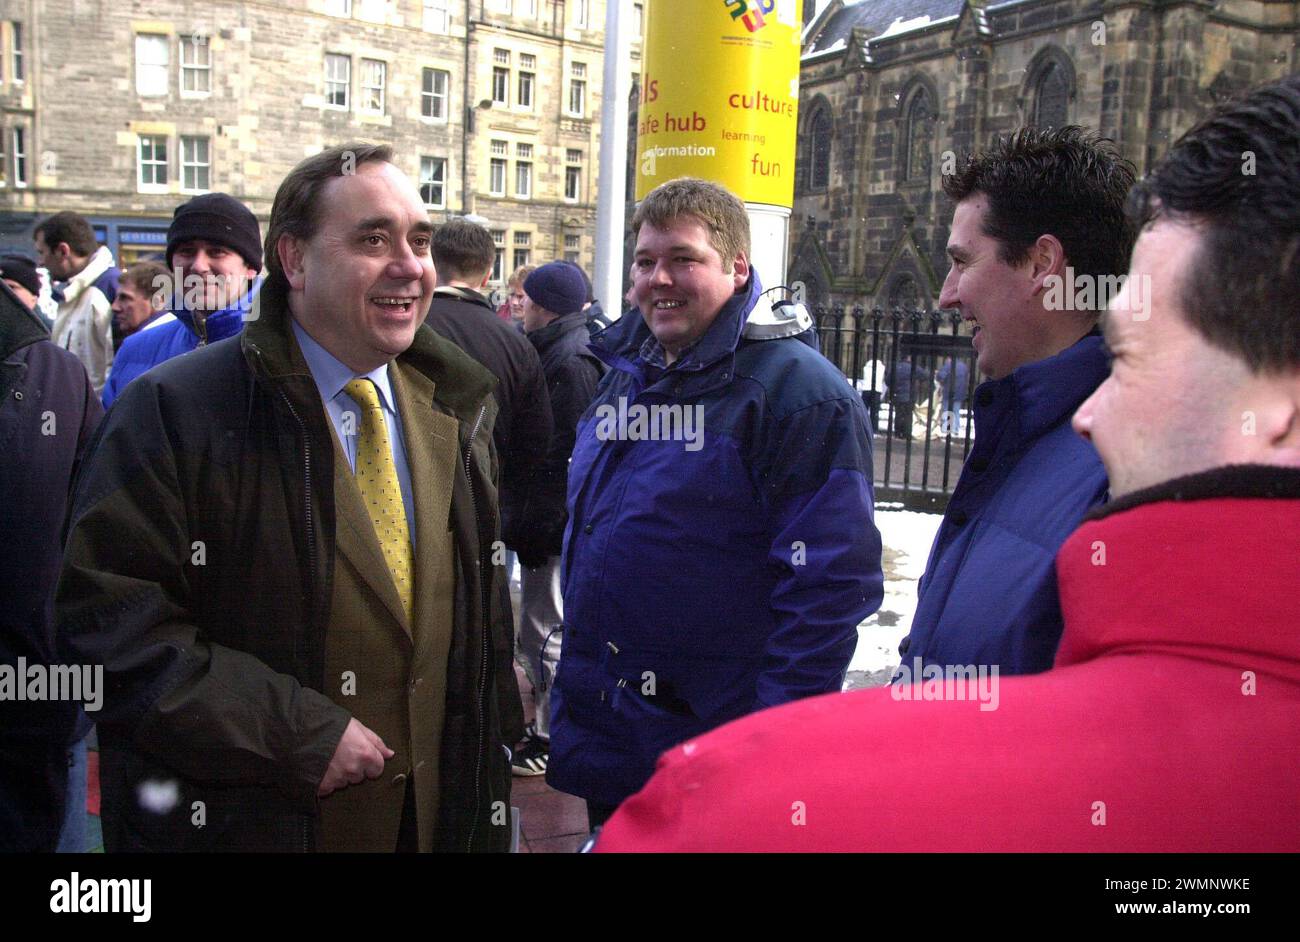 The Scottish Fishermans Rally and protest outside The Scottish Parliament today ( Thursday 1/3/01 ). Alex Salmond MP meets the fishermen. Stock Photo